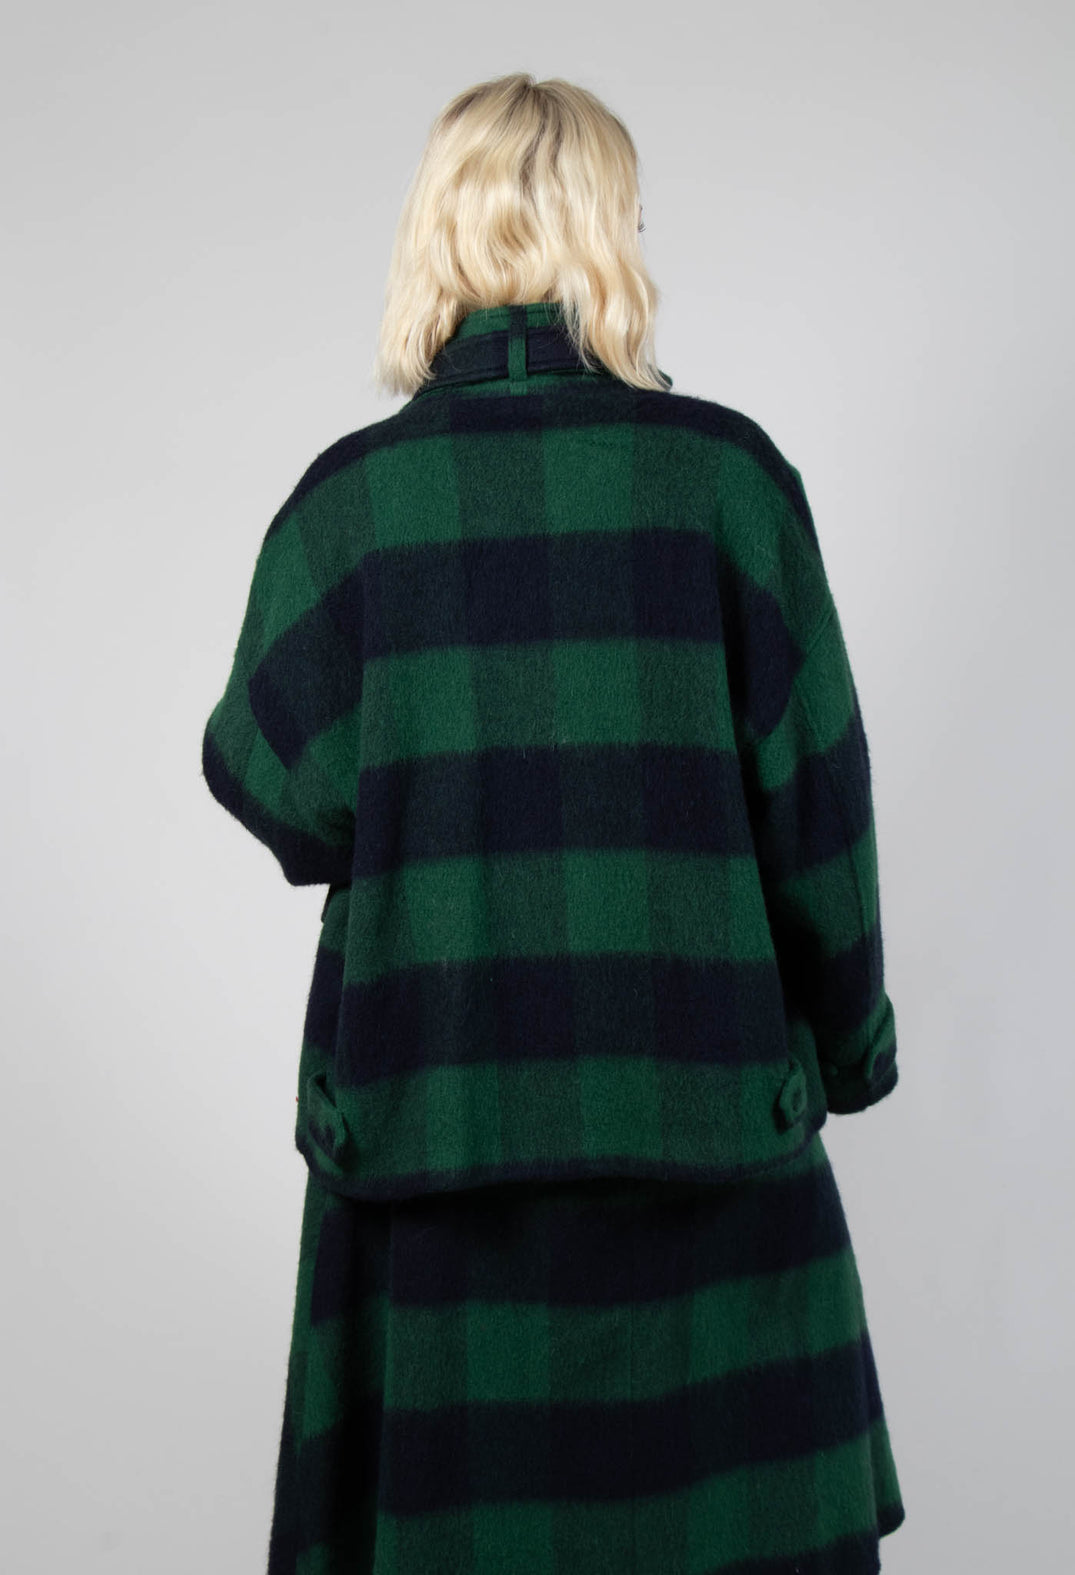 London Wool Check Jacket in Blue and Green